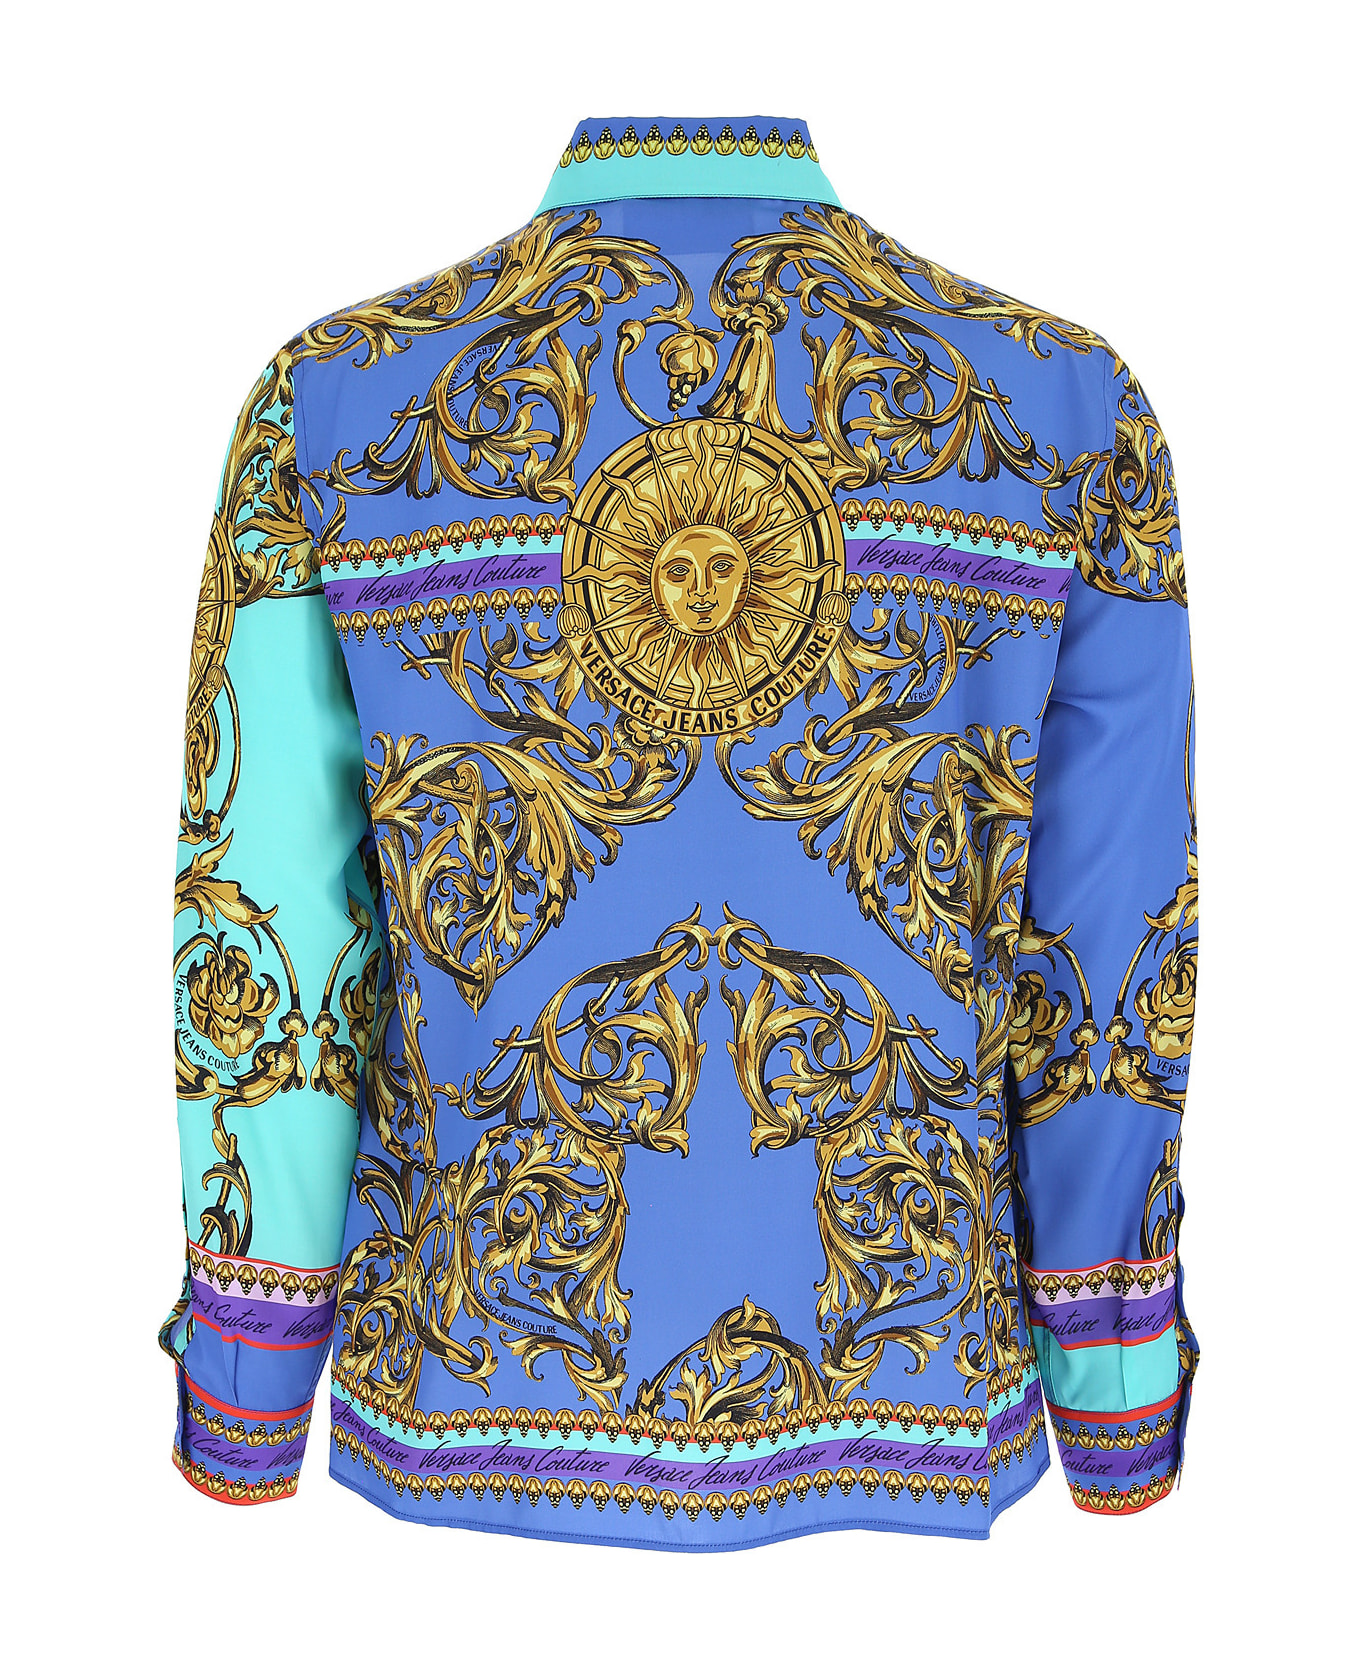 Versace Jeans Couture Shirt | italist